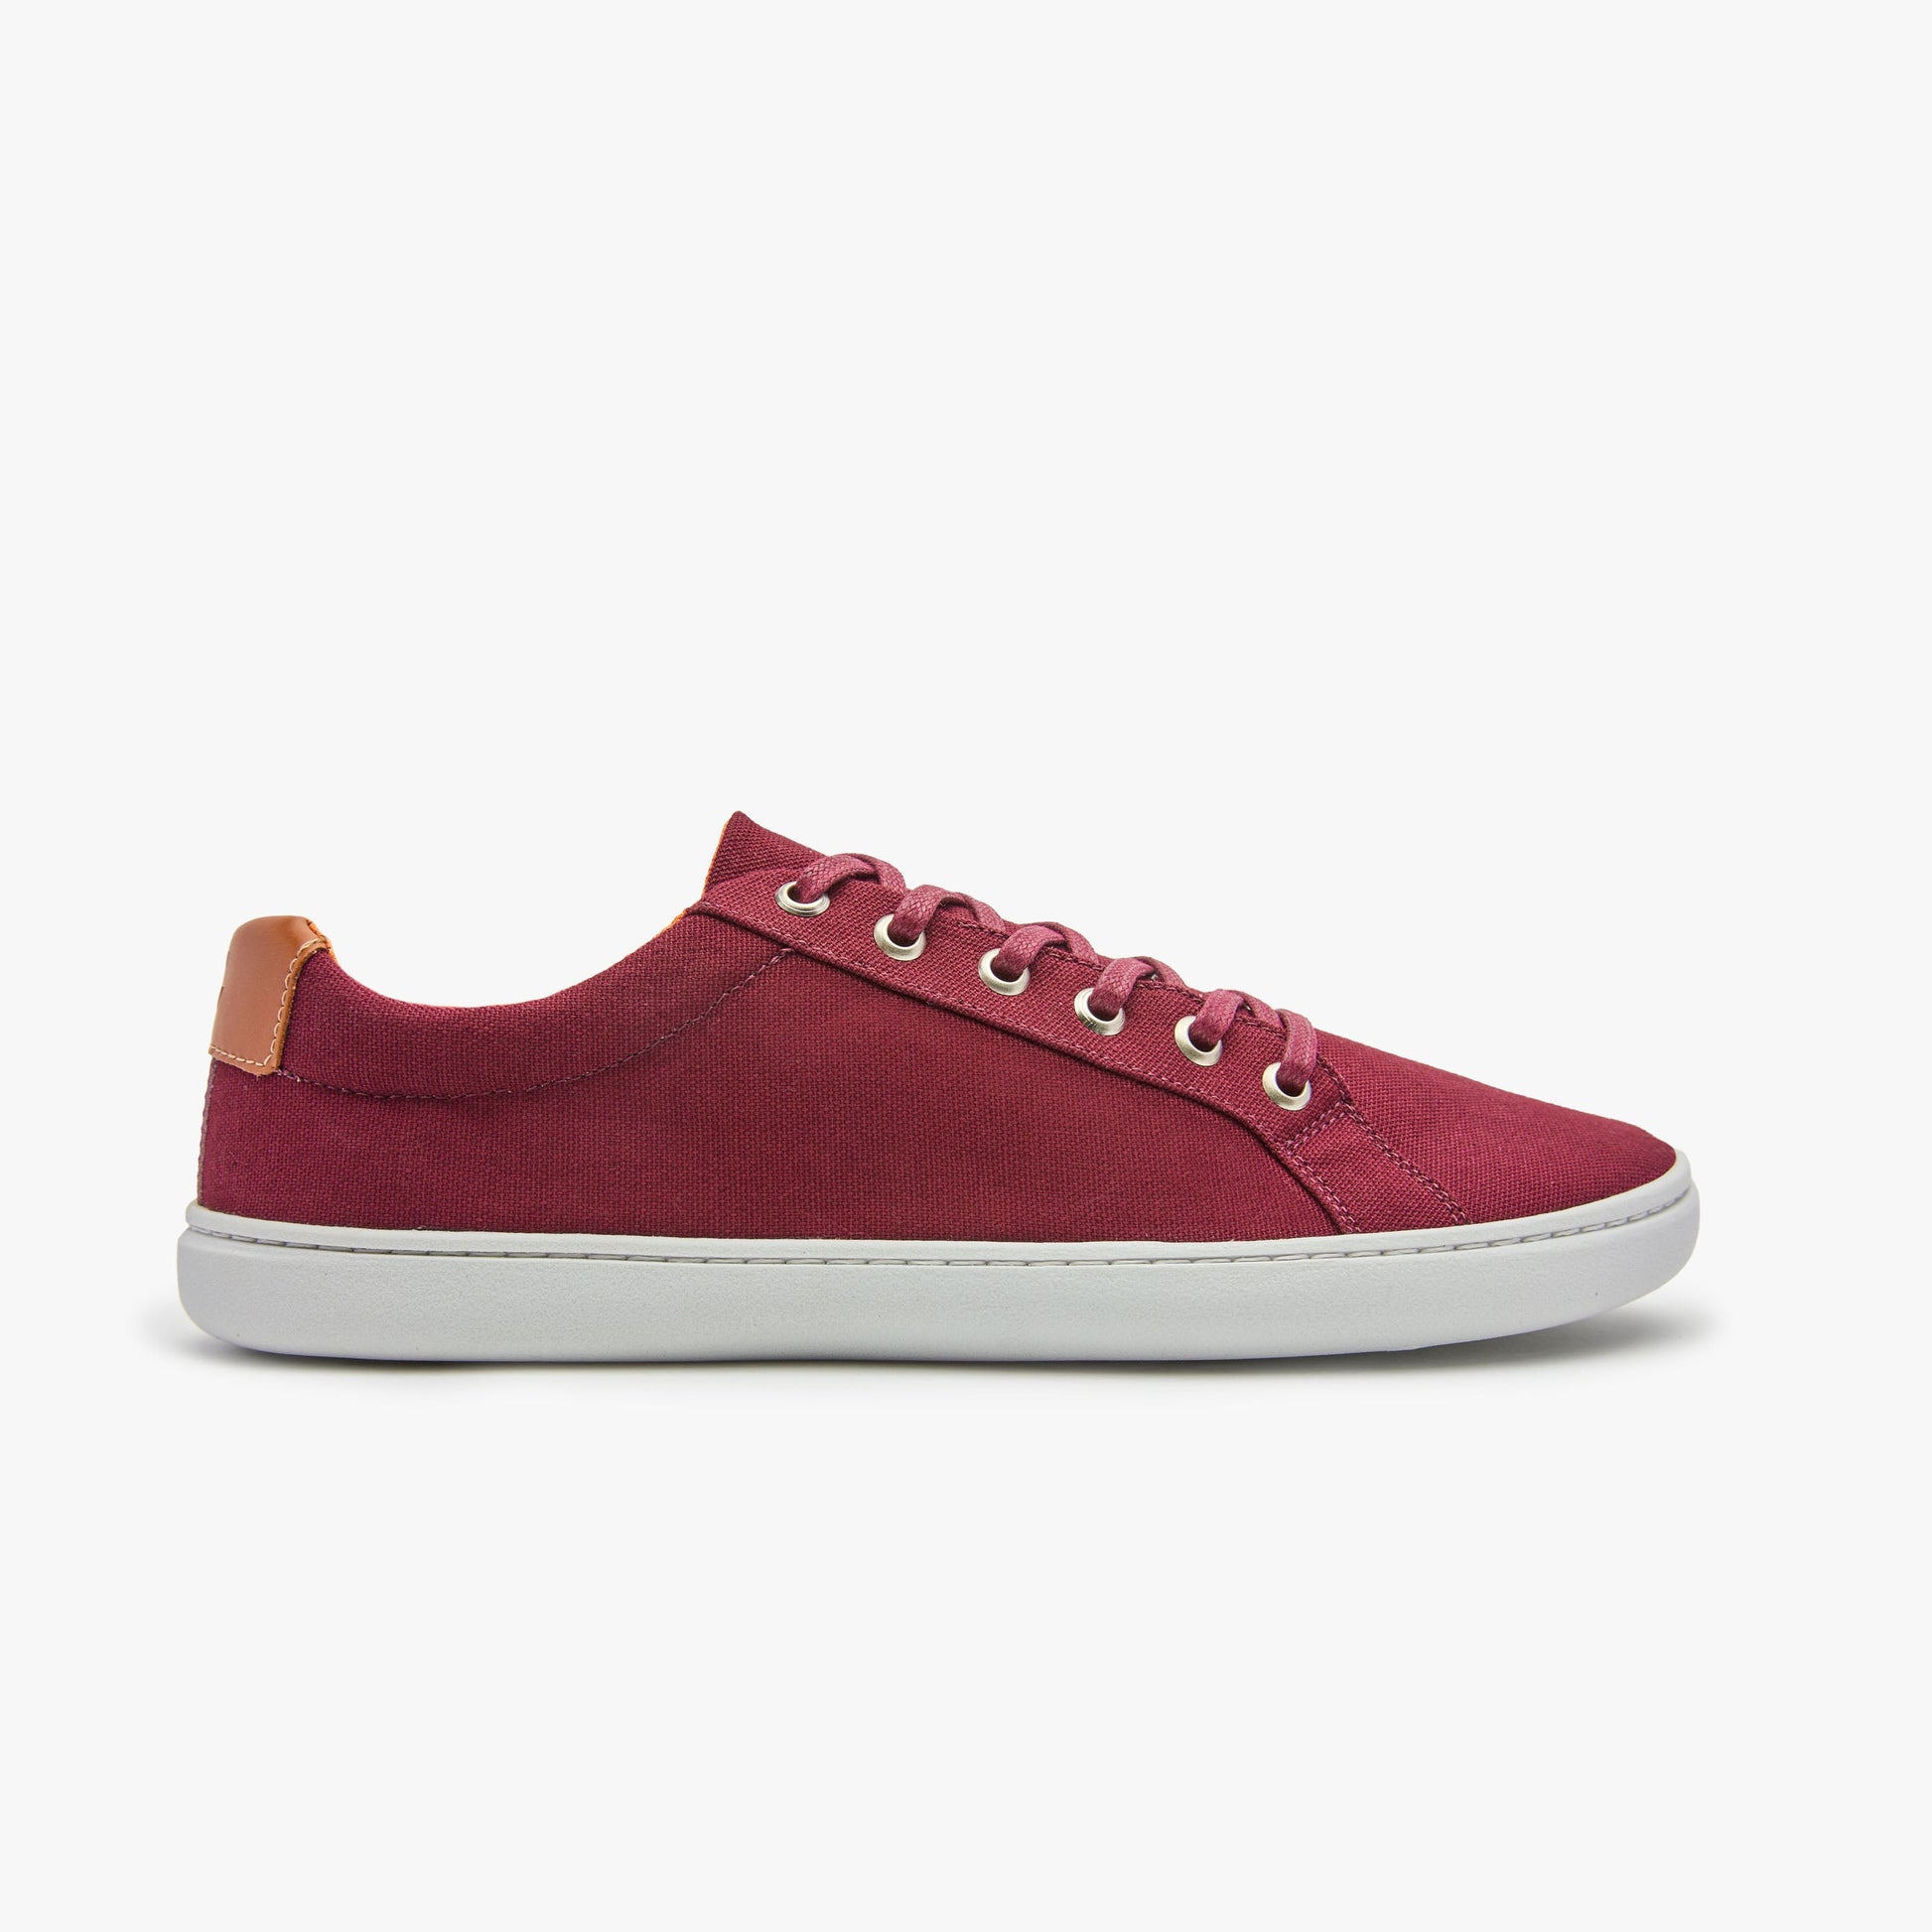 The Everyday Sneaker for Men | Gen 3 in Cotton Canvas-2